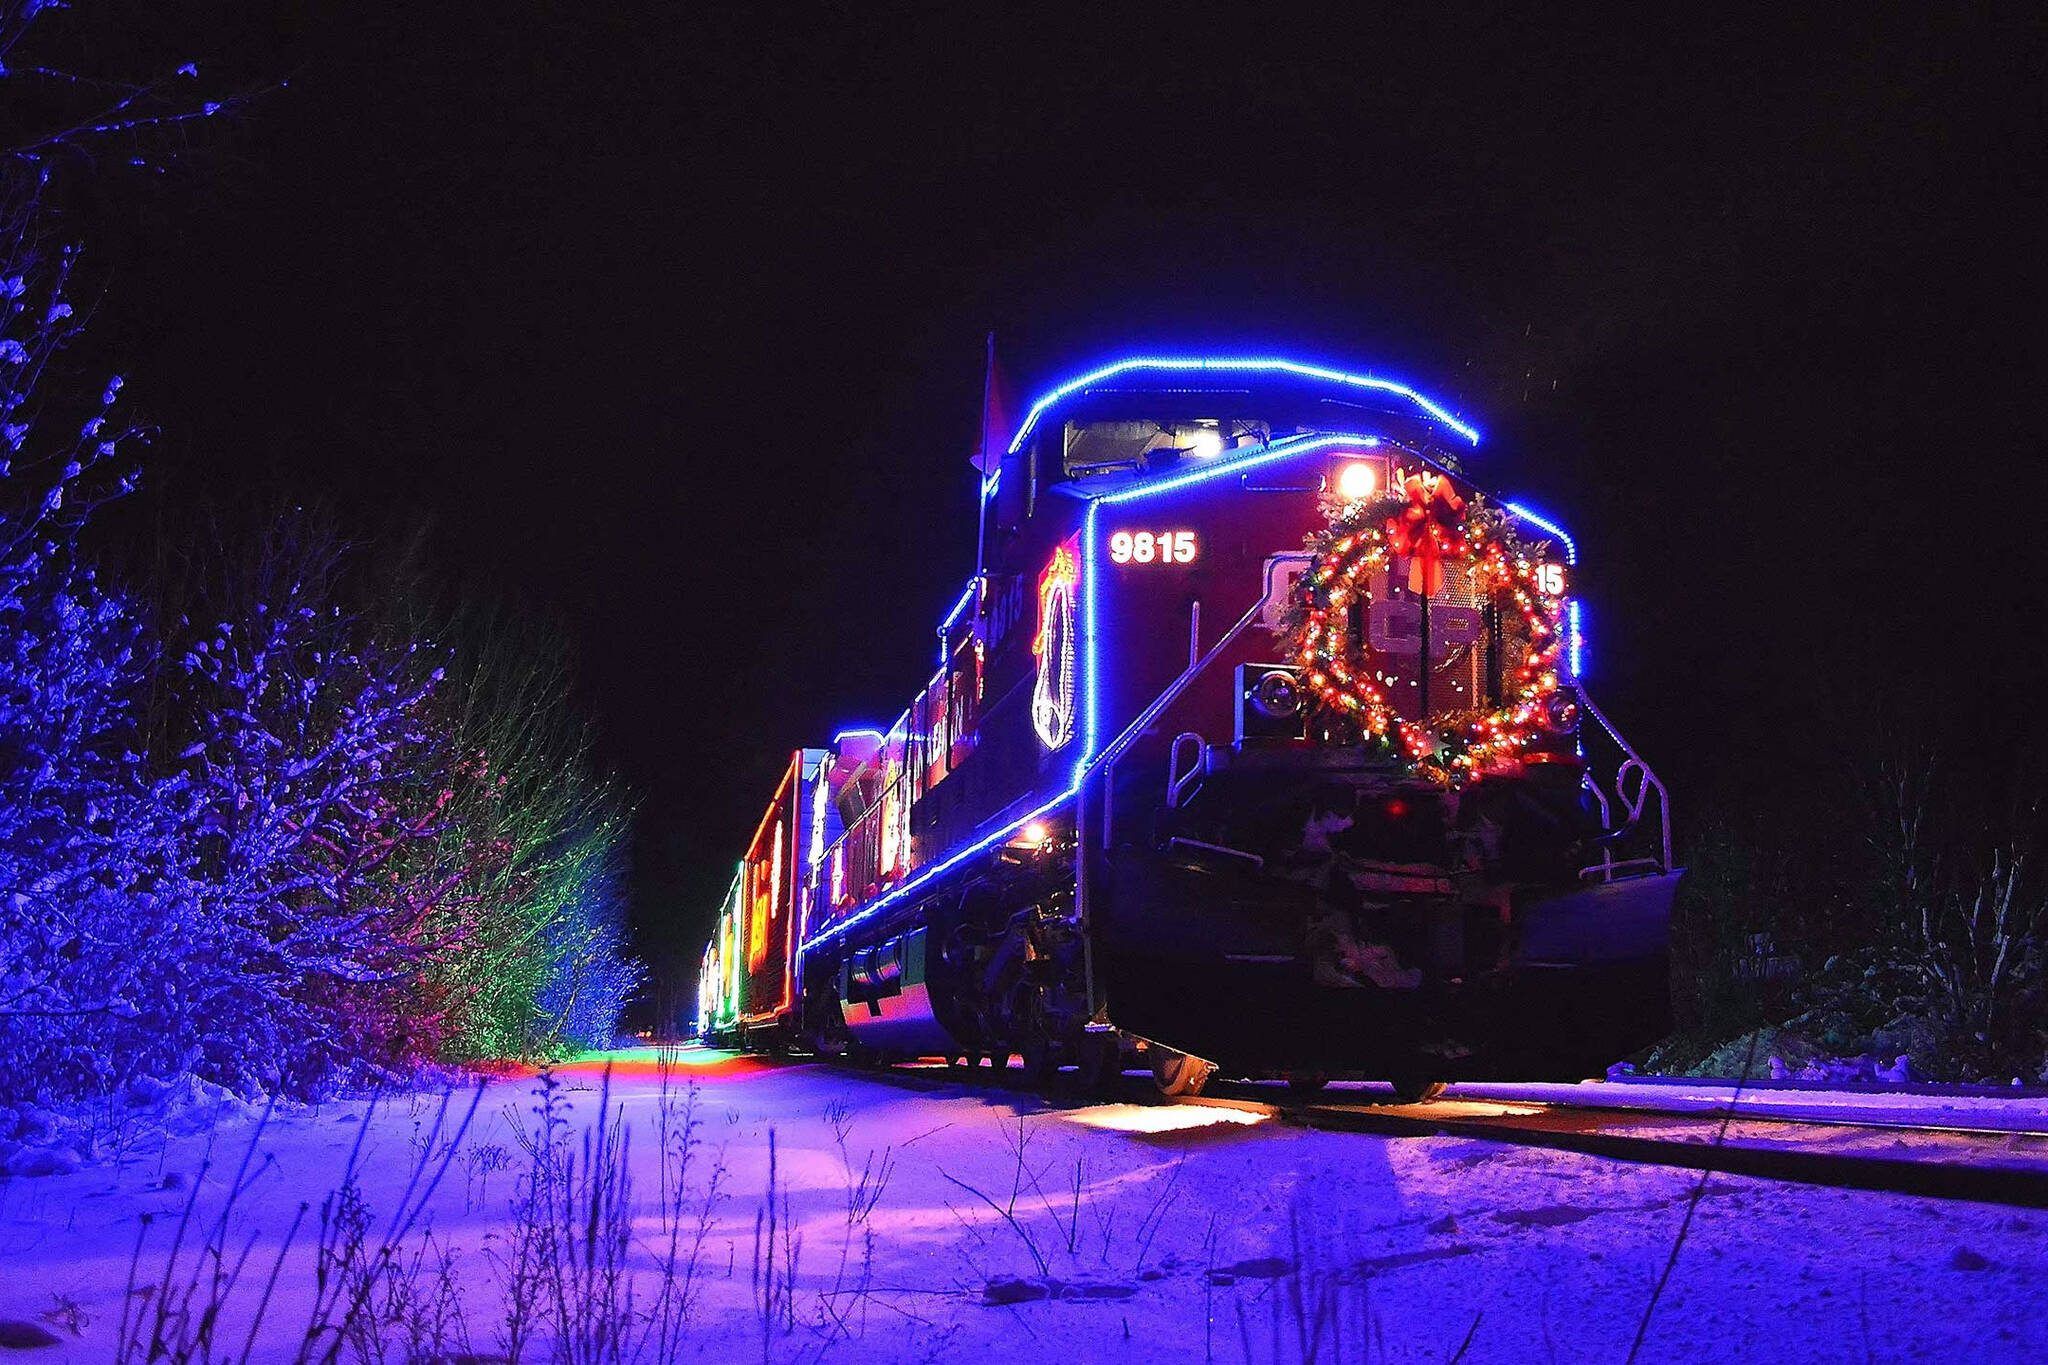 cp holiday train